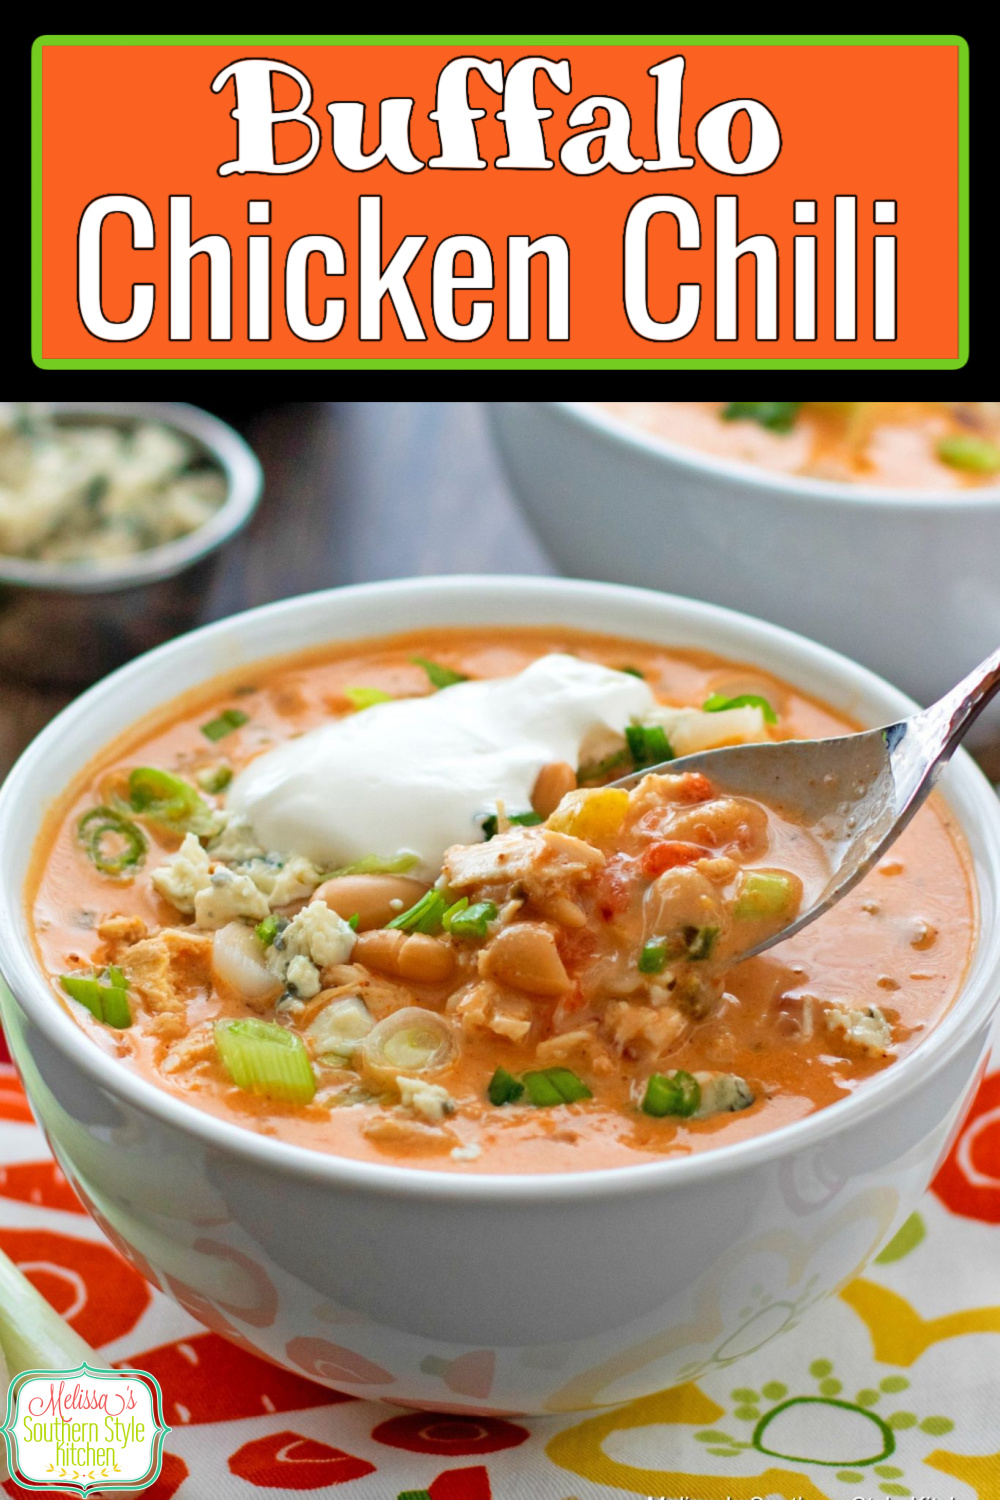 Topped with bleu cheese crumbles and sliced green onion, this Buffalo Chicken Chili is sure to bring the heat to your meal #chickenchili #buffalochickenchili #buffalochicken #hotwings #easychickenrecipes #bestchickenrecipes #maindishrecipes #dinner #dinnerideas #southernfood #southernrecipes via @melissasssk